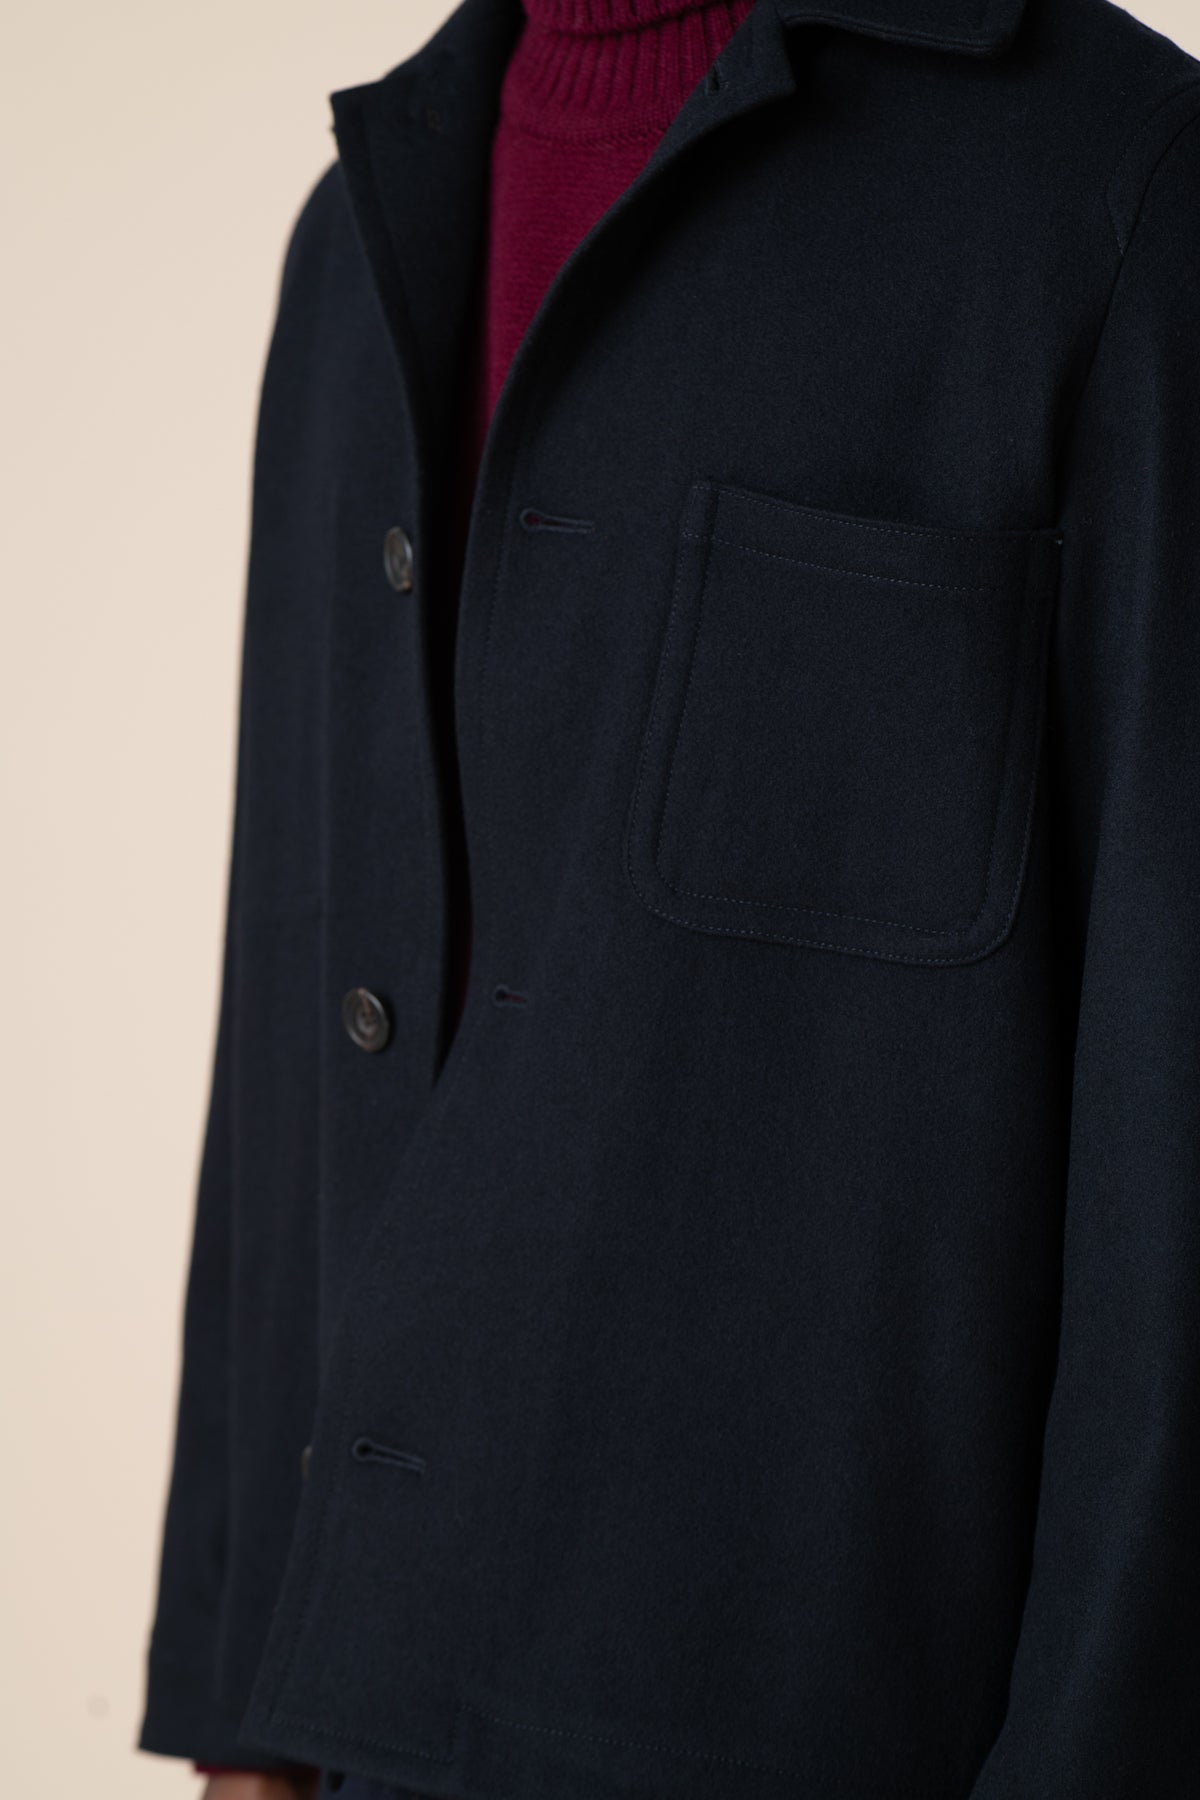 
            Detail image of top pocket of Arthur wool chore jacket in navy, layered over lambswool roll neck in burgundy.